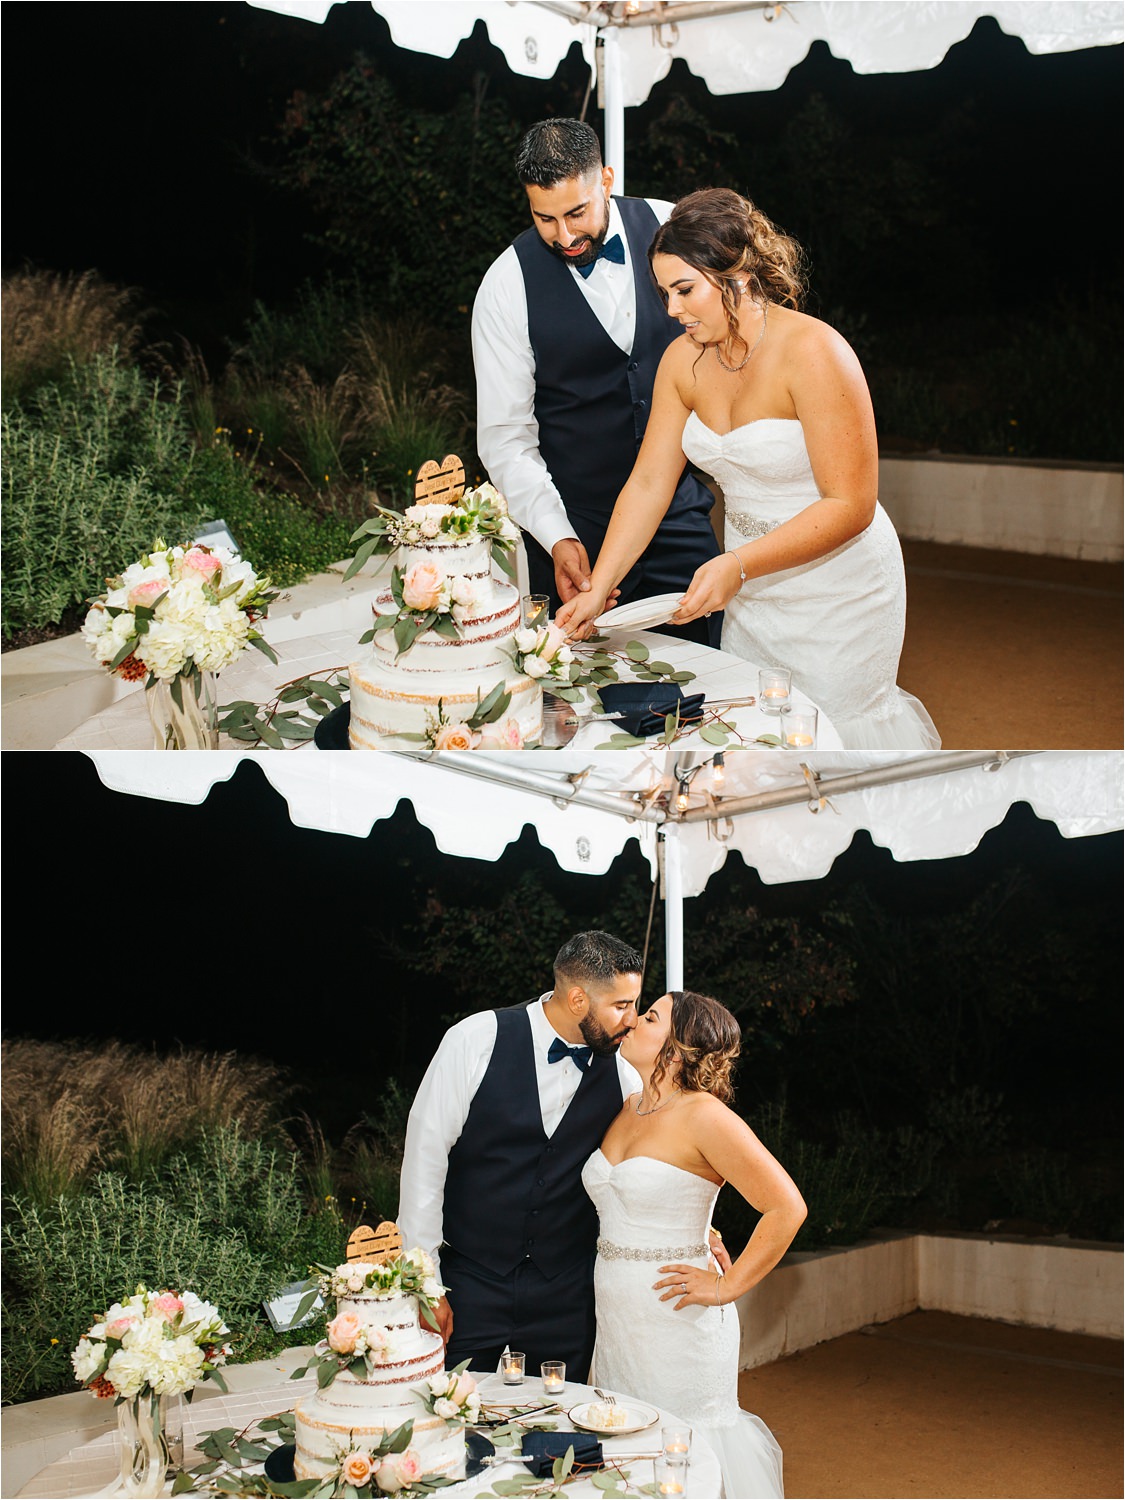 Bride and Groom cutting cake at their Fall Wedding - http://brittneyhannonphotography.com